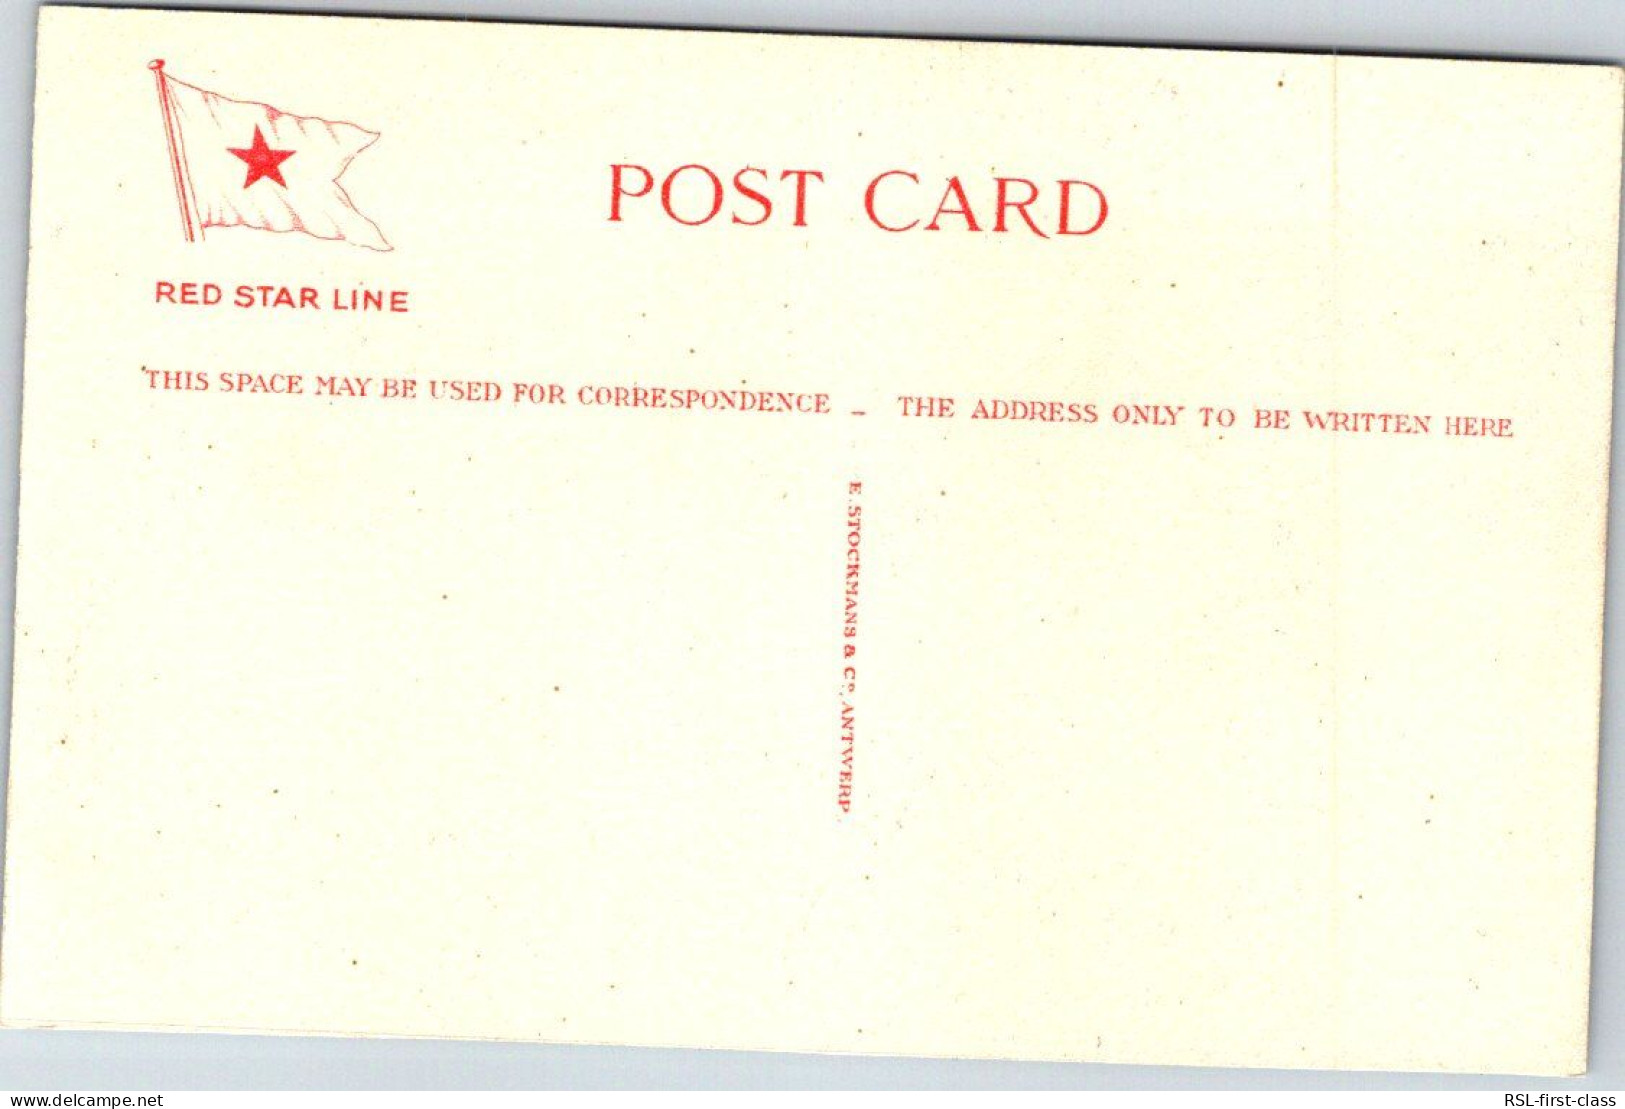 RED STAR LINE : Card From Serie Exotic Birds & Ladies - World Cruises SS Belgenland Art Series - Rrrarissimes - Steamers